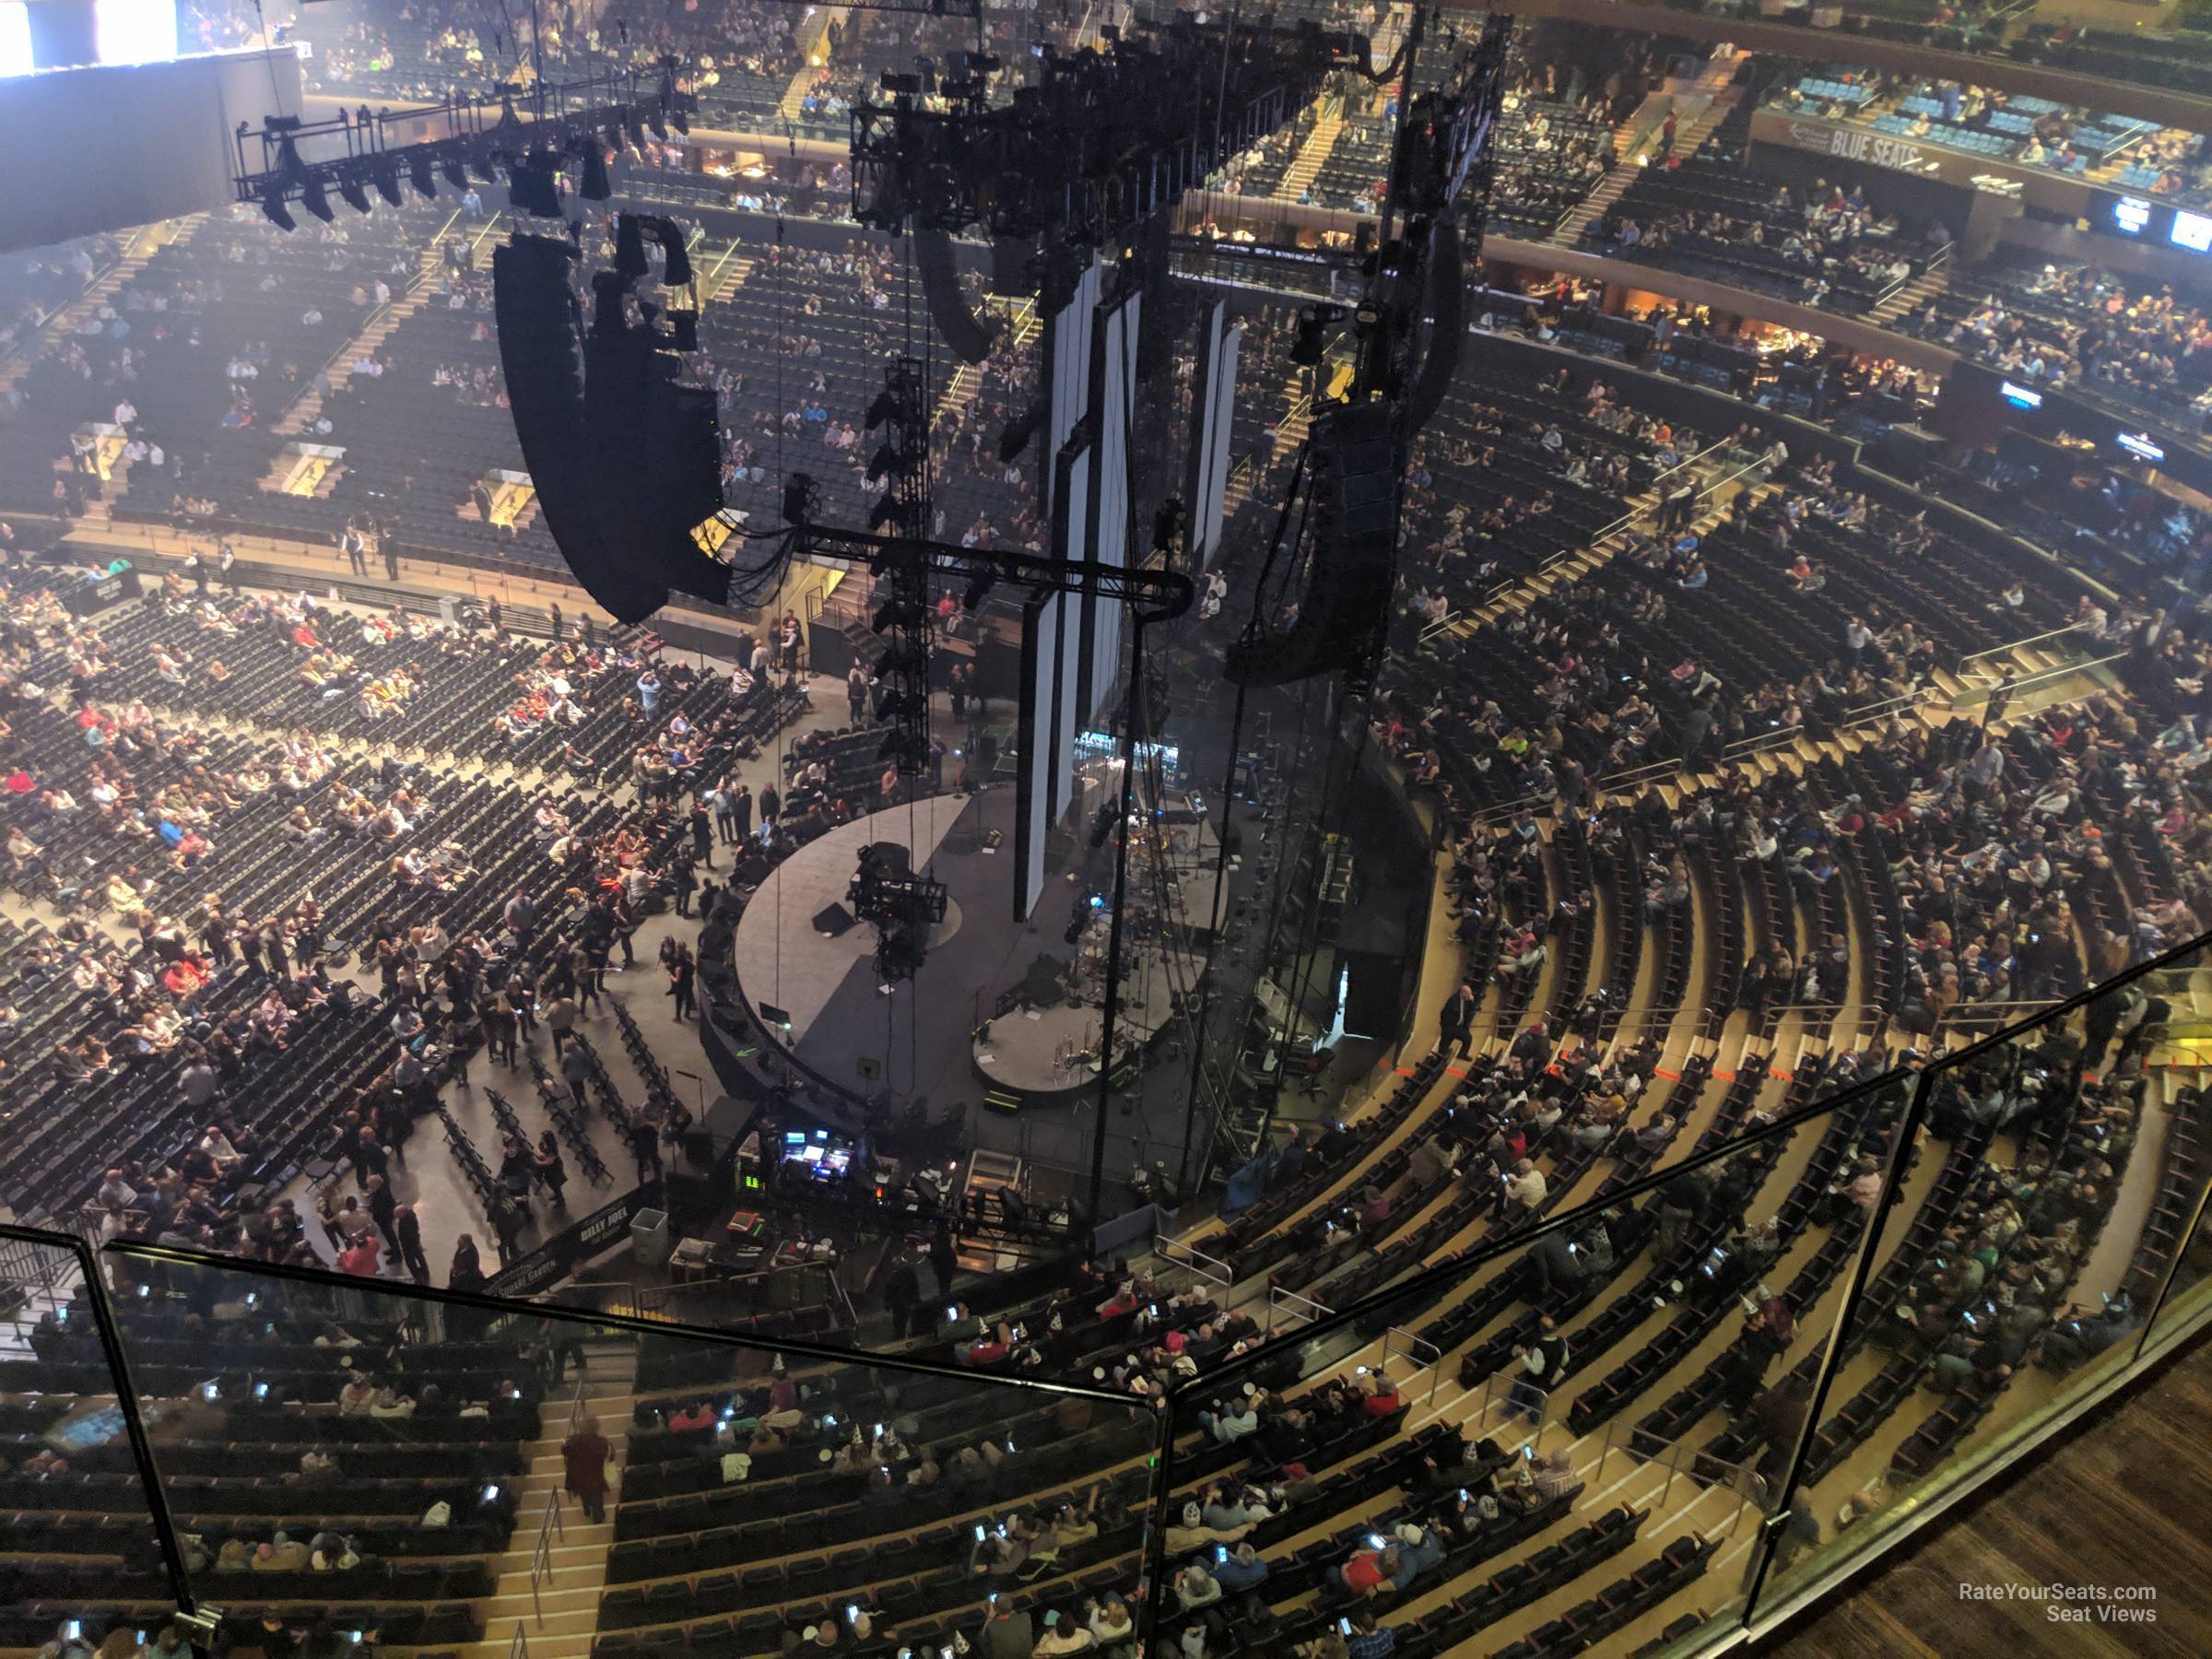 section 317, row 2 seat view  for concert - madison square garden